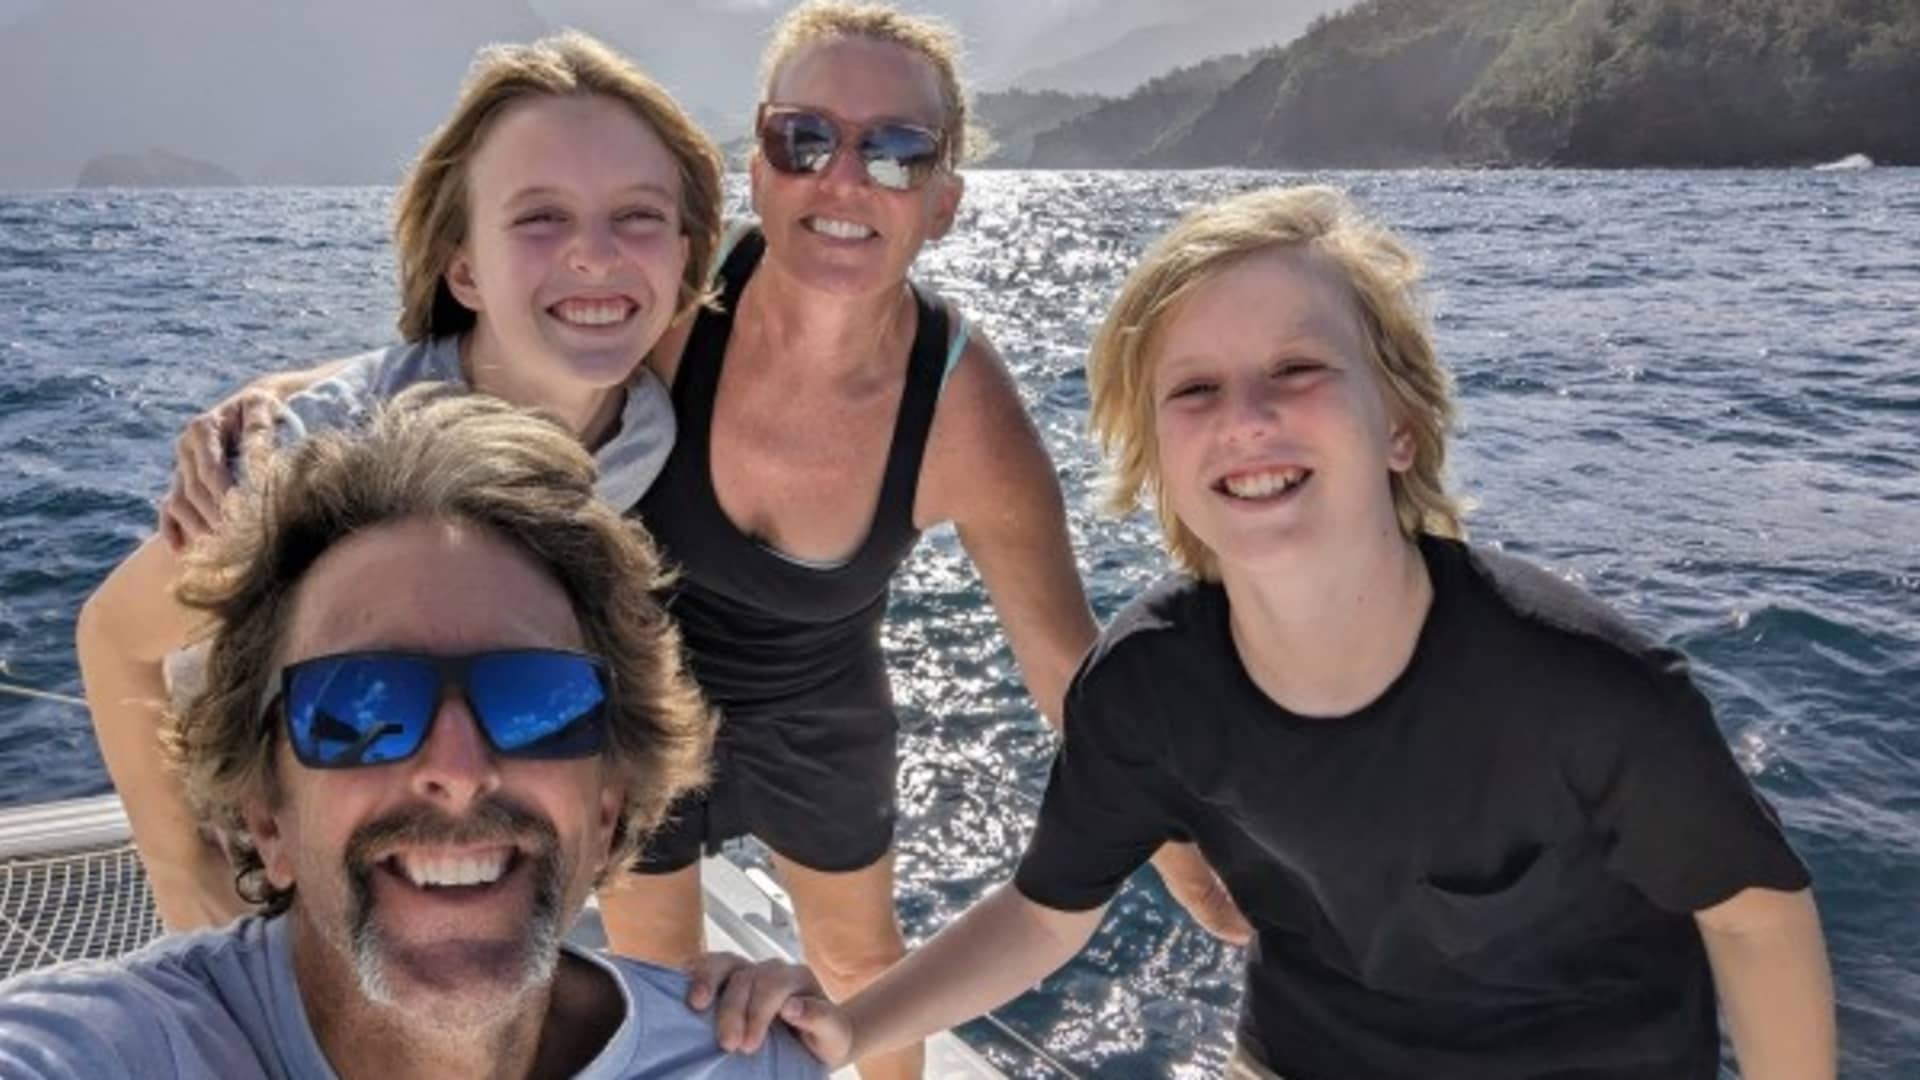 The Schulte family approaching the Marquesas Islands after spending 21 days at sea crossing the Pacific Ocean.